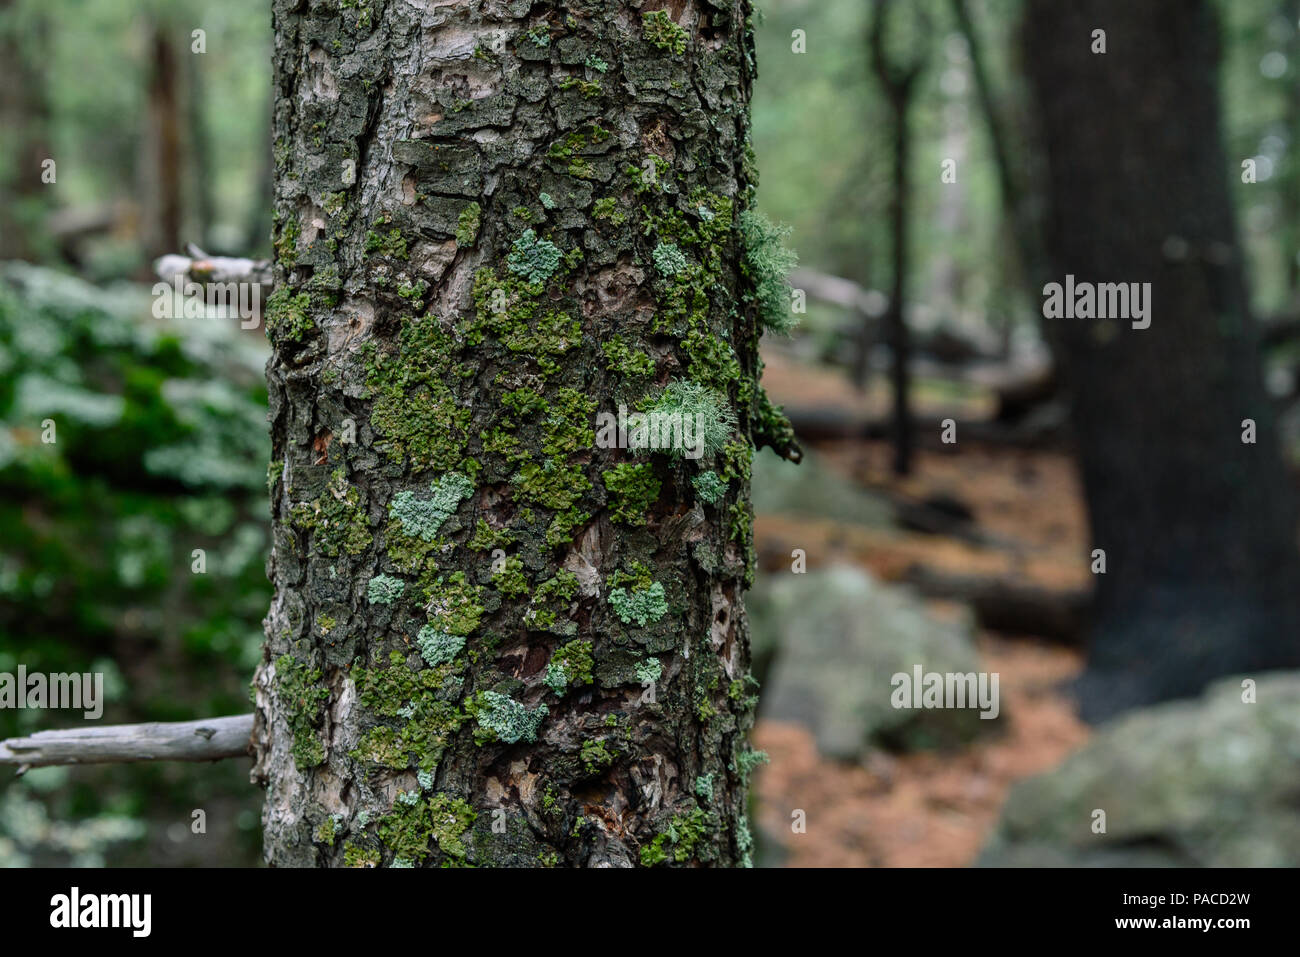 Tree trunk background with moss and lichen all over the bark. Shot in a lush forest Stock Photo